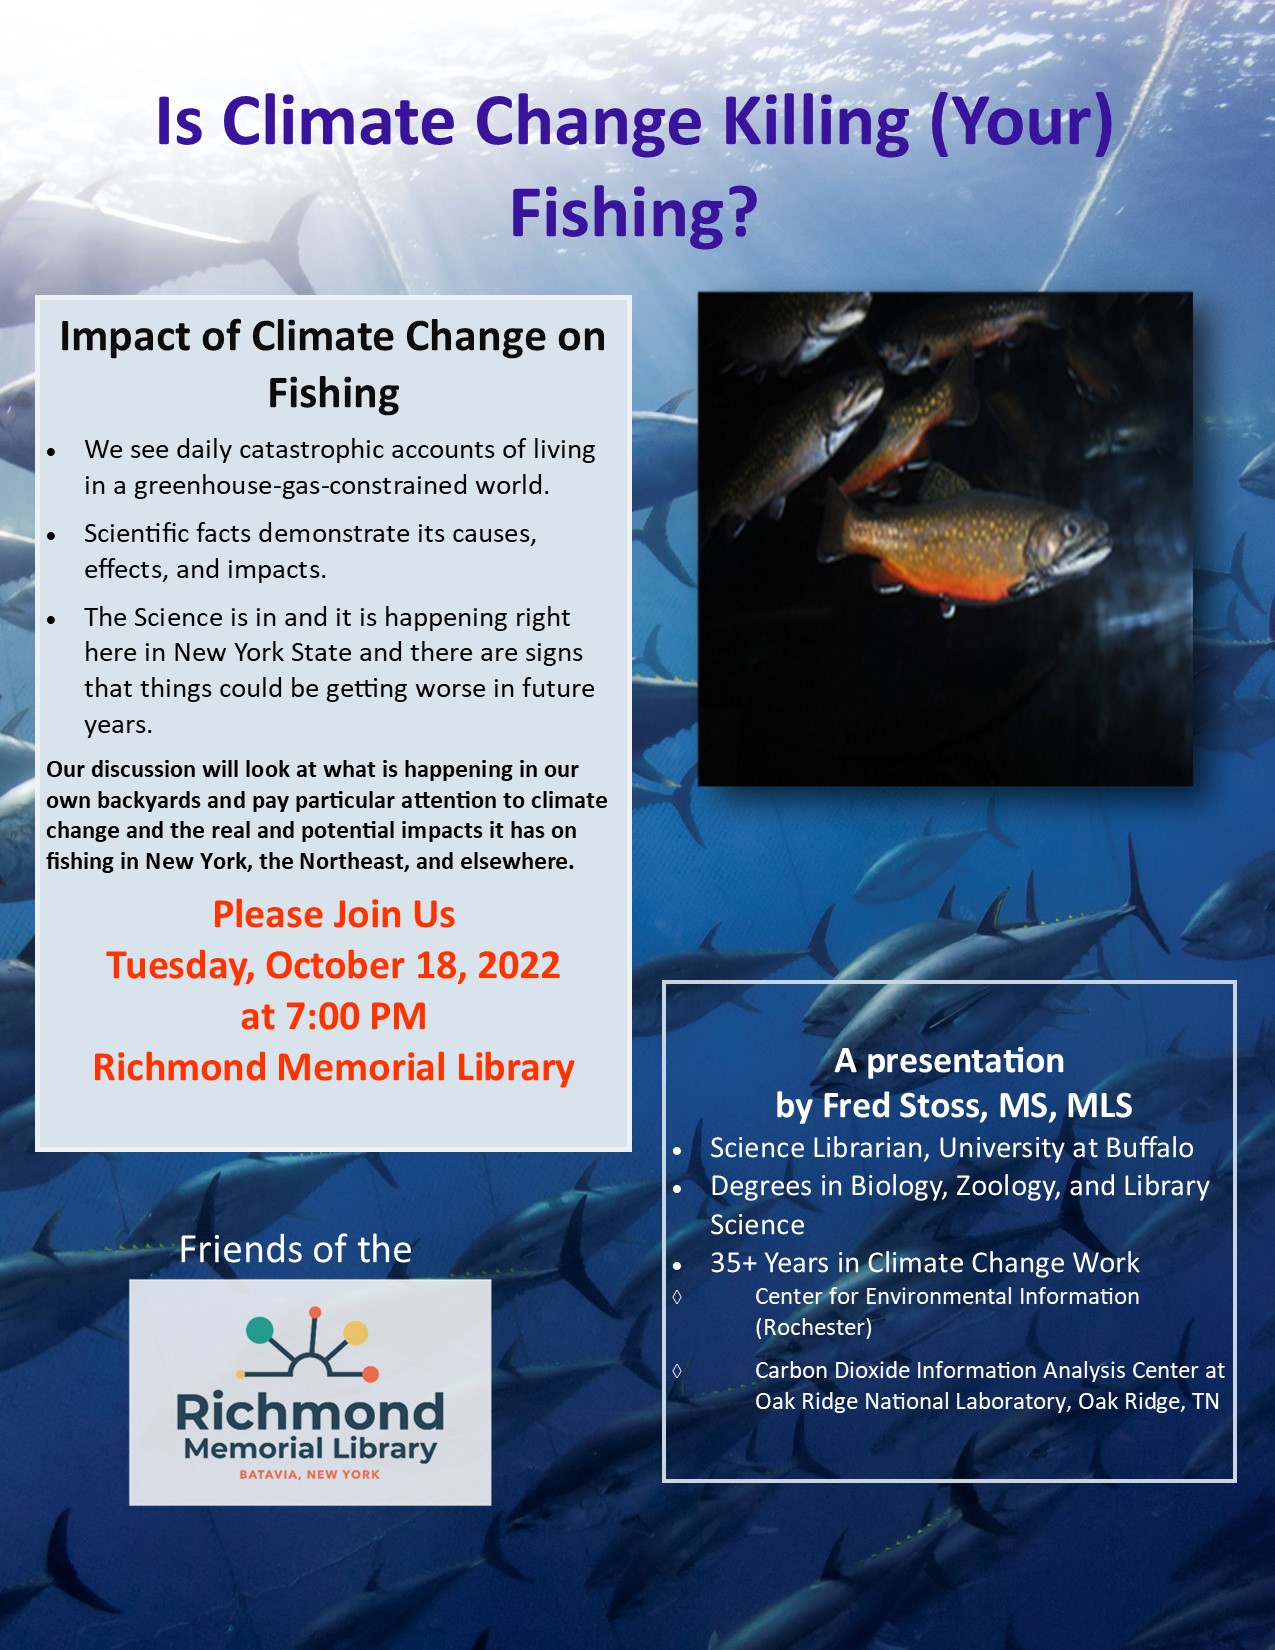 Is Climate Change Killing (Your) Fishing?